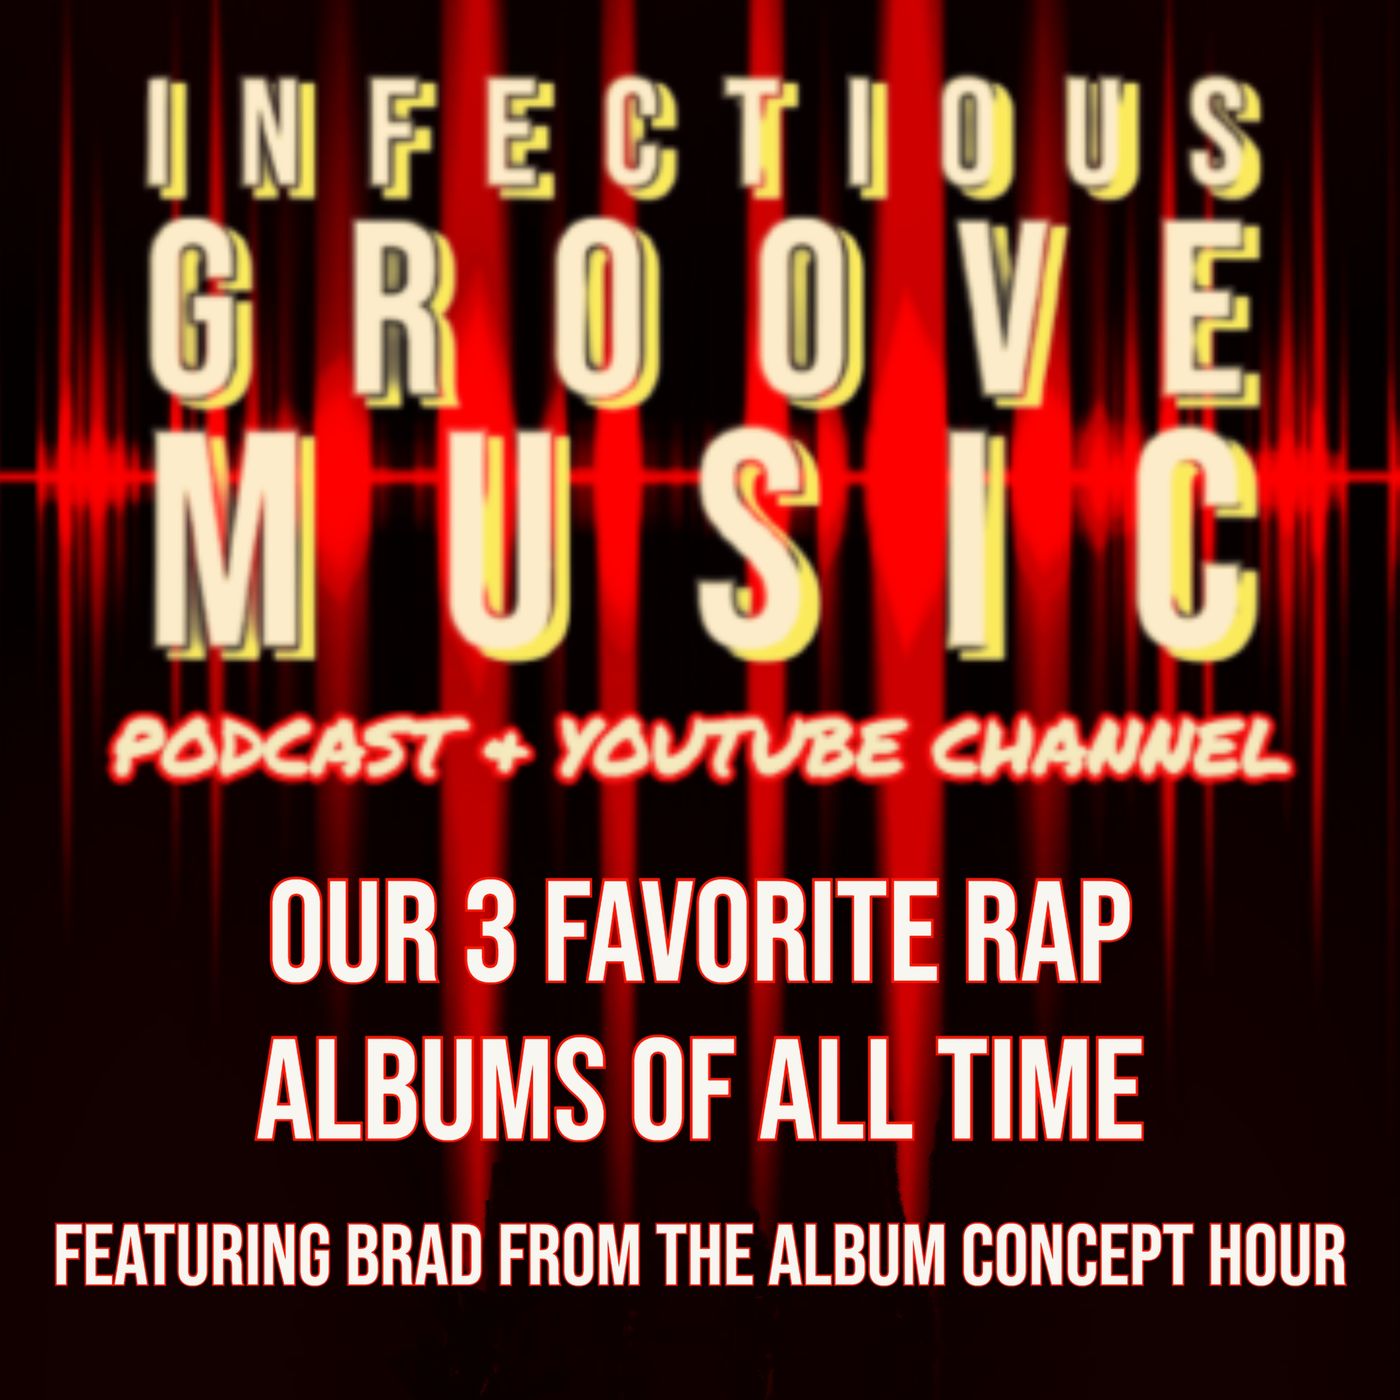 Our 3 Favorite Rap Albums of All Time featuring Brad of Album Concept Hour Image